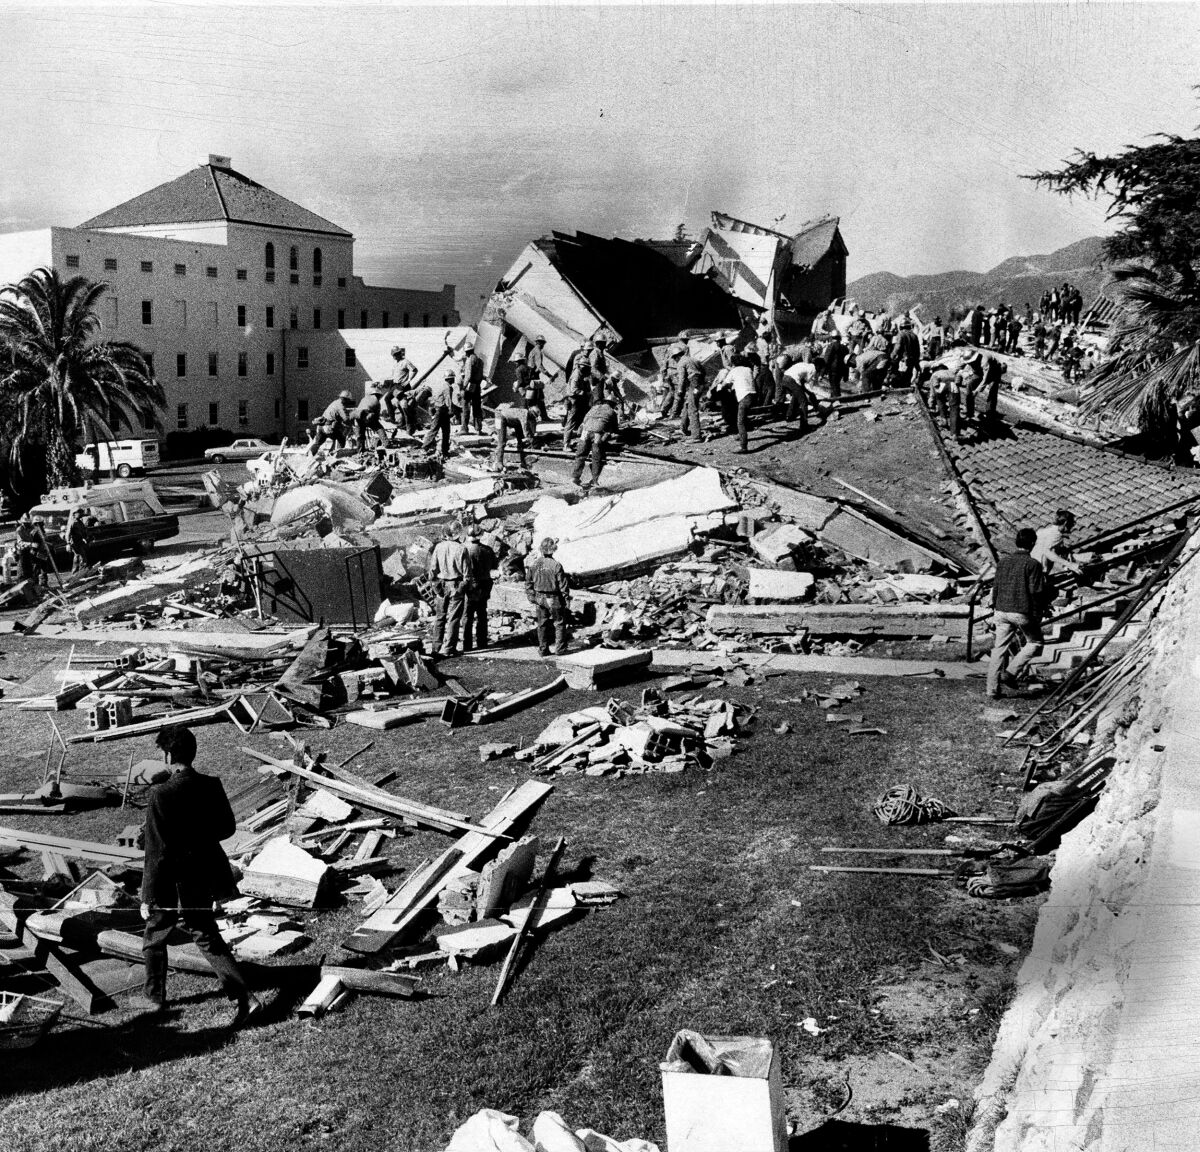 People stand near a large collapsed building.